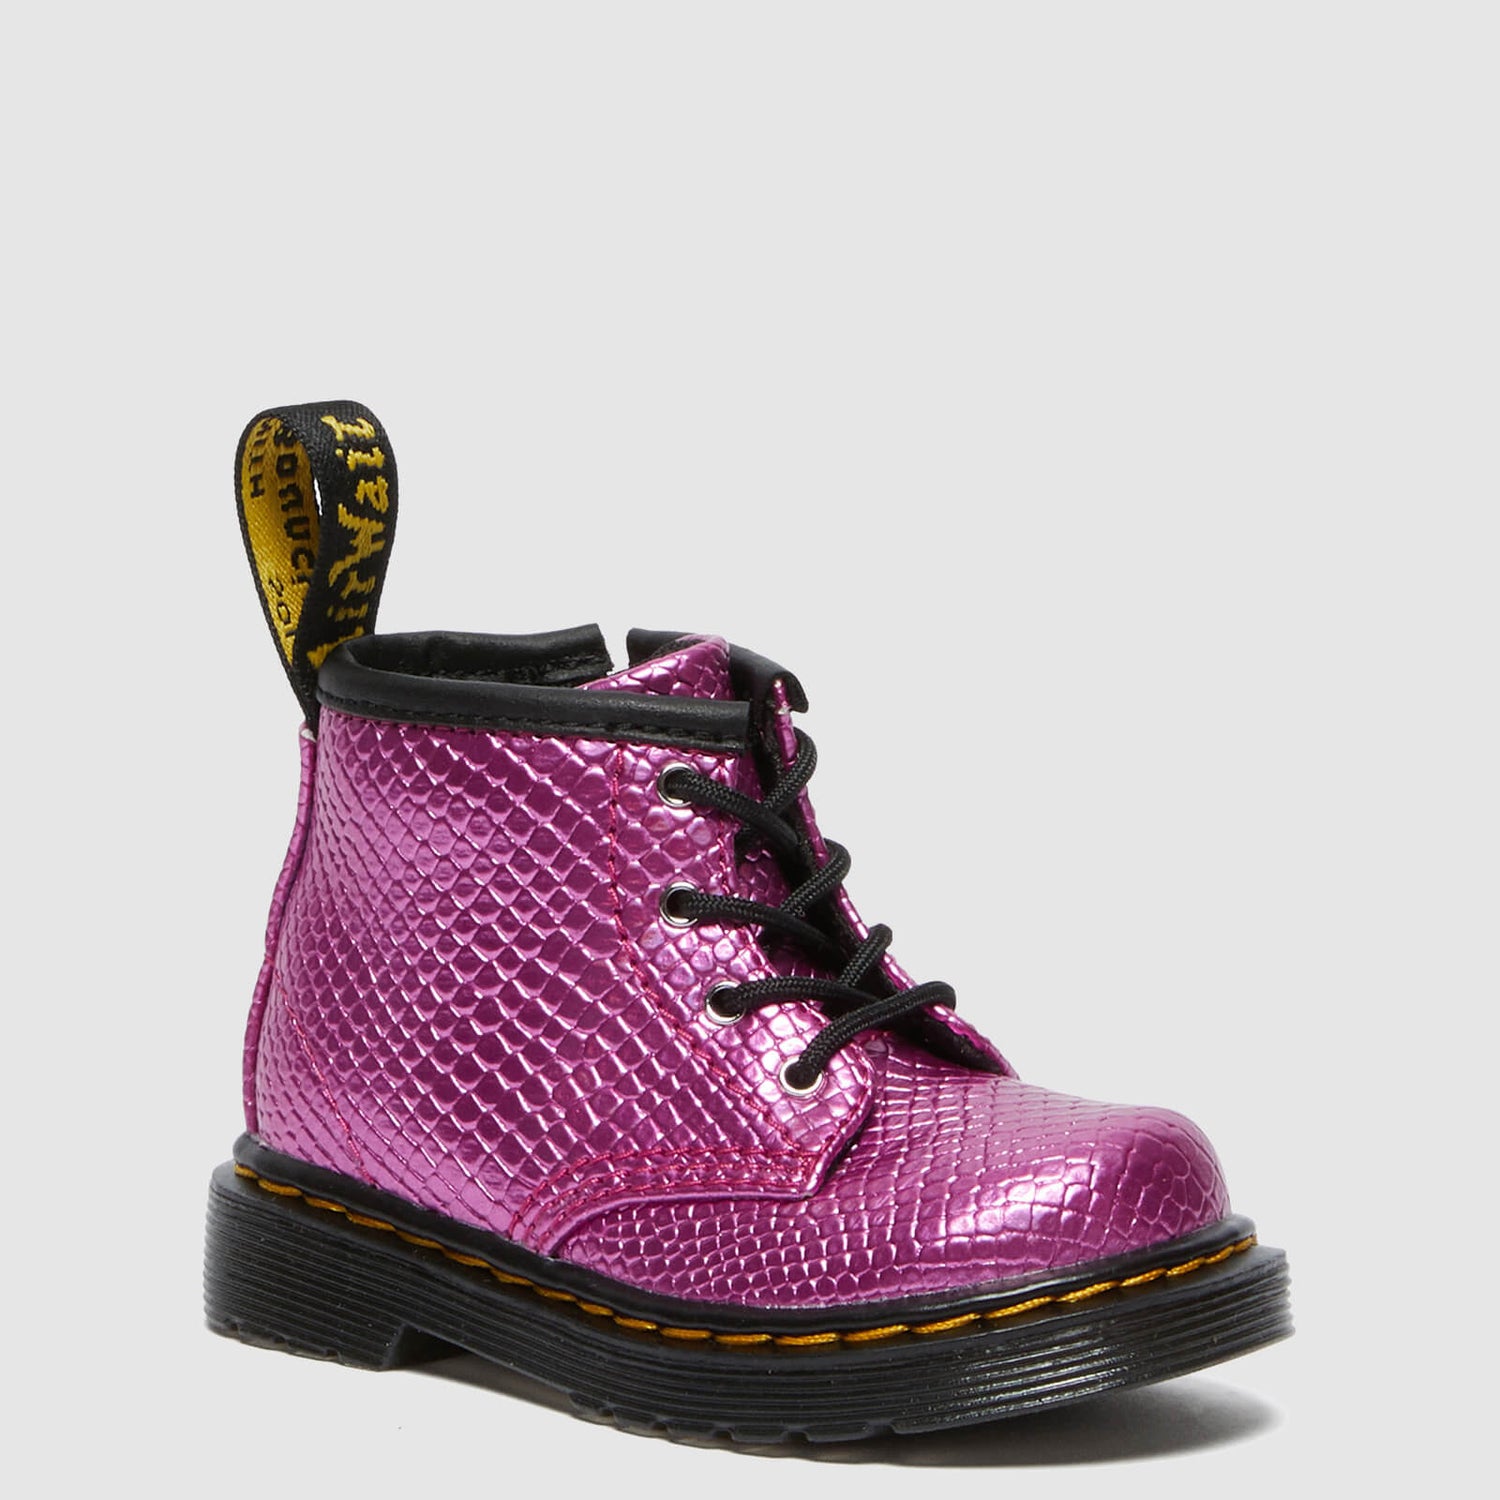 Dr. Martens Babies' 1460 Patent Lamper Lace Up Boots - Pink Reptile Emboss